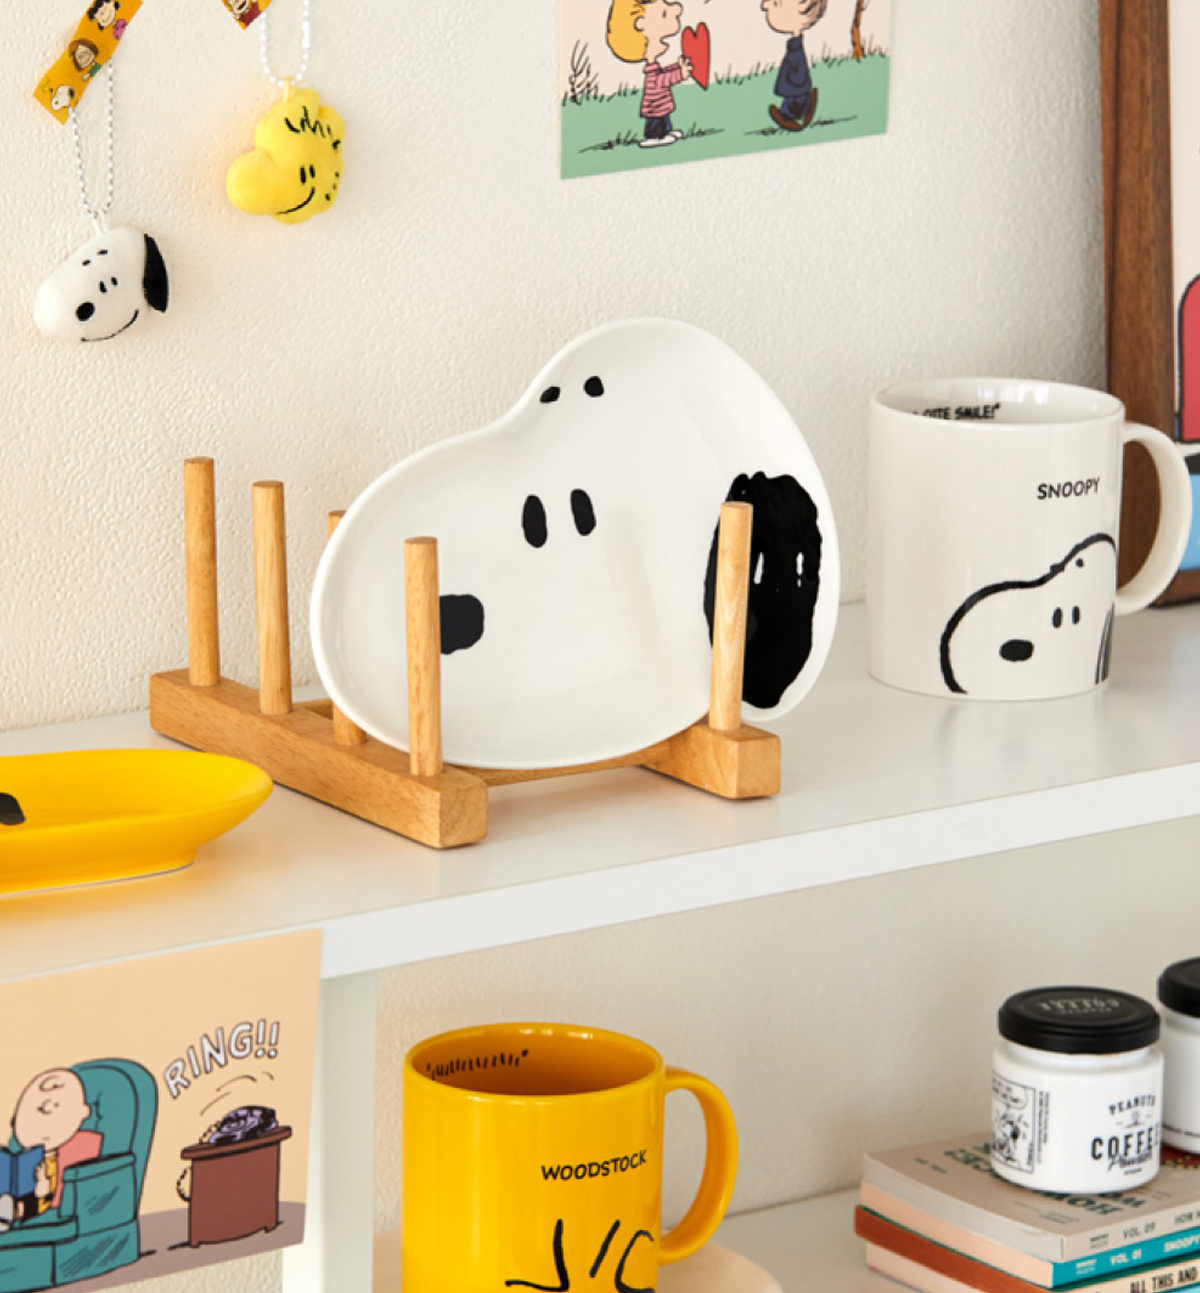 Peanuts Snoopy Face Plate